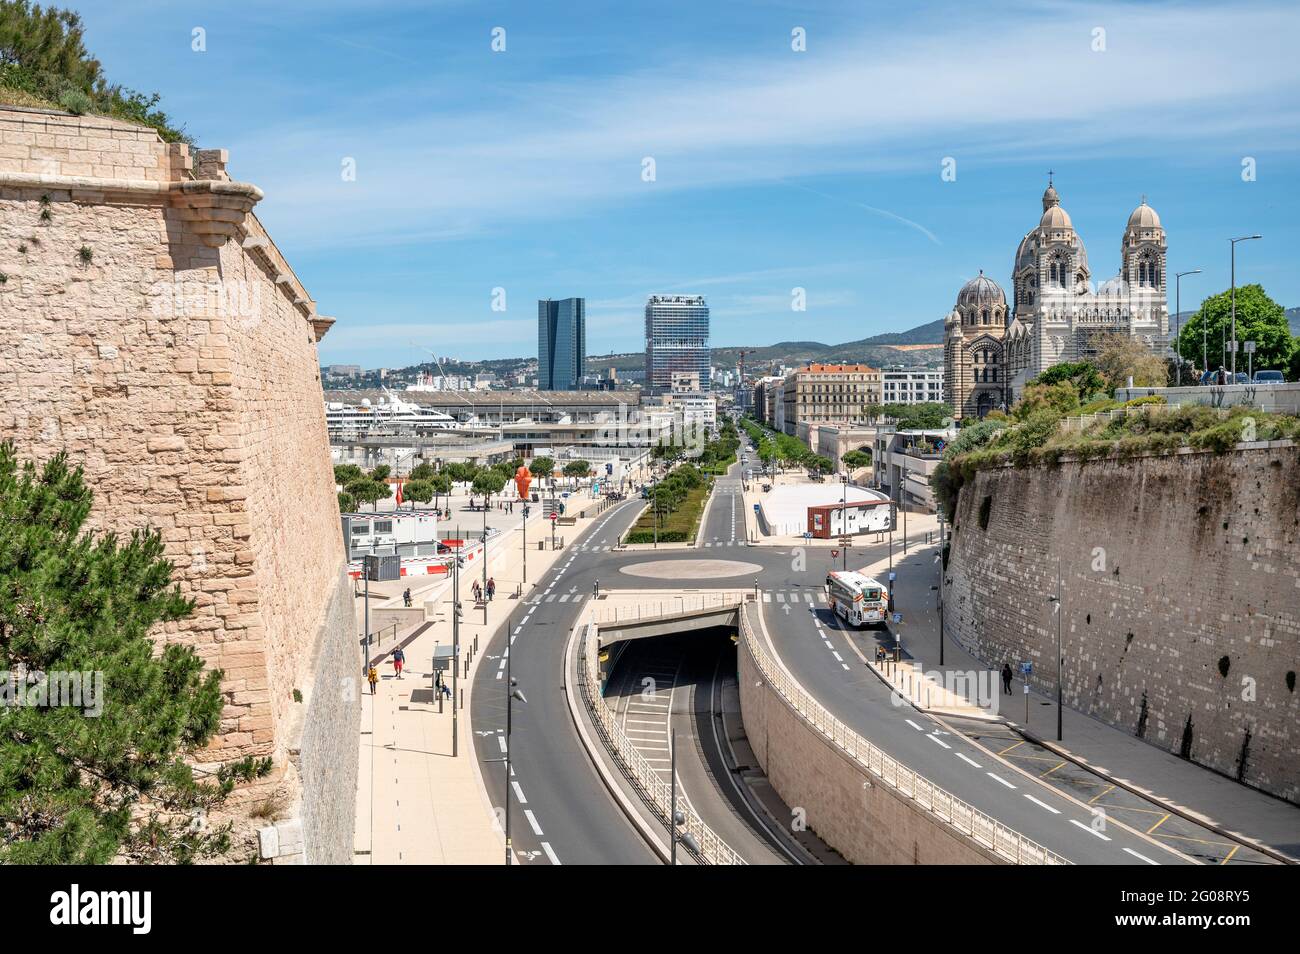 https://c8.alamy.com/comp/2G08RY5/the-view-from-the-fort-saint-jean-towards-la-joliette-and-la-marseillaise-marseille-france-2G08RY5.jpg